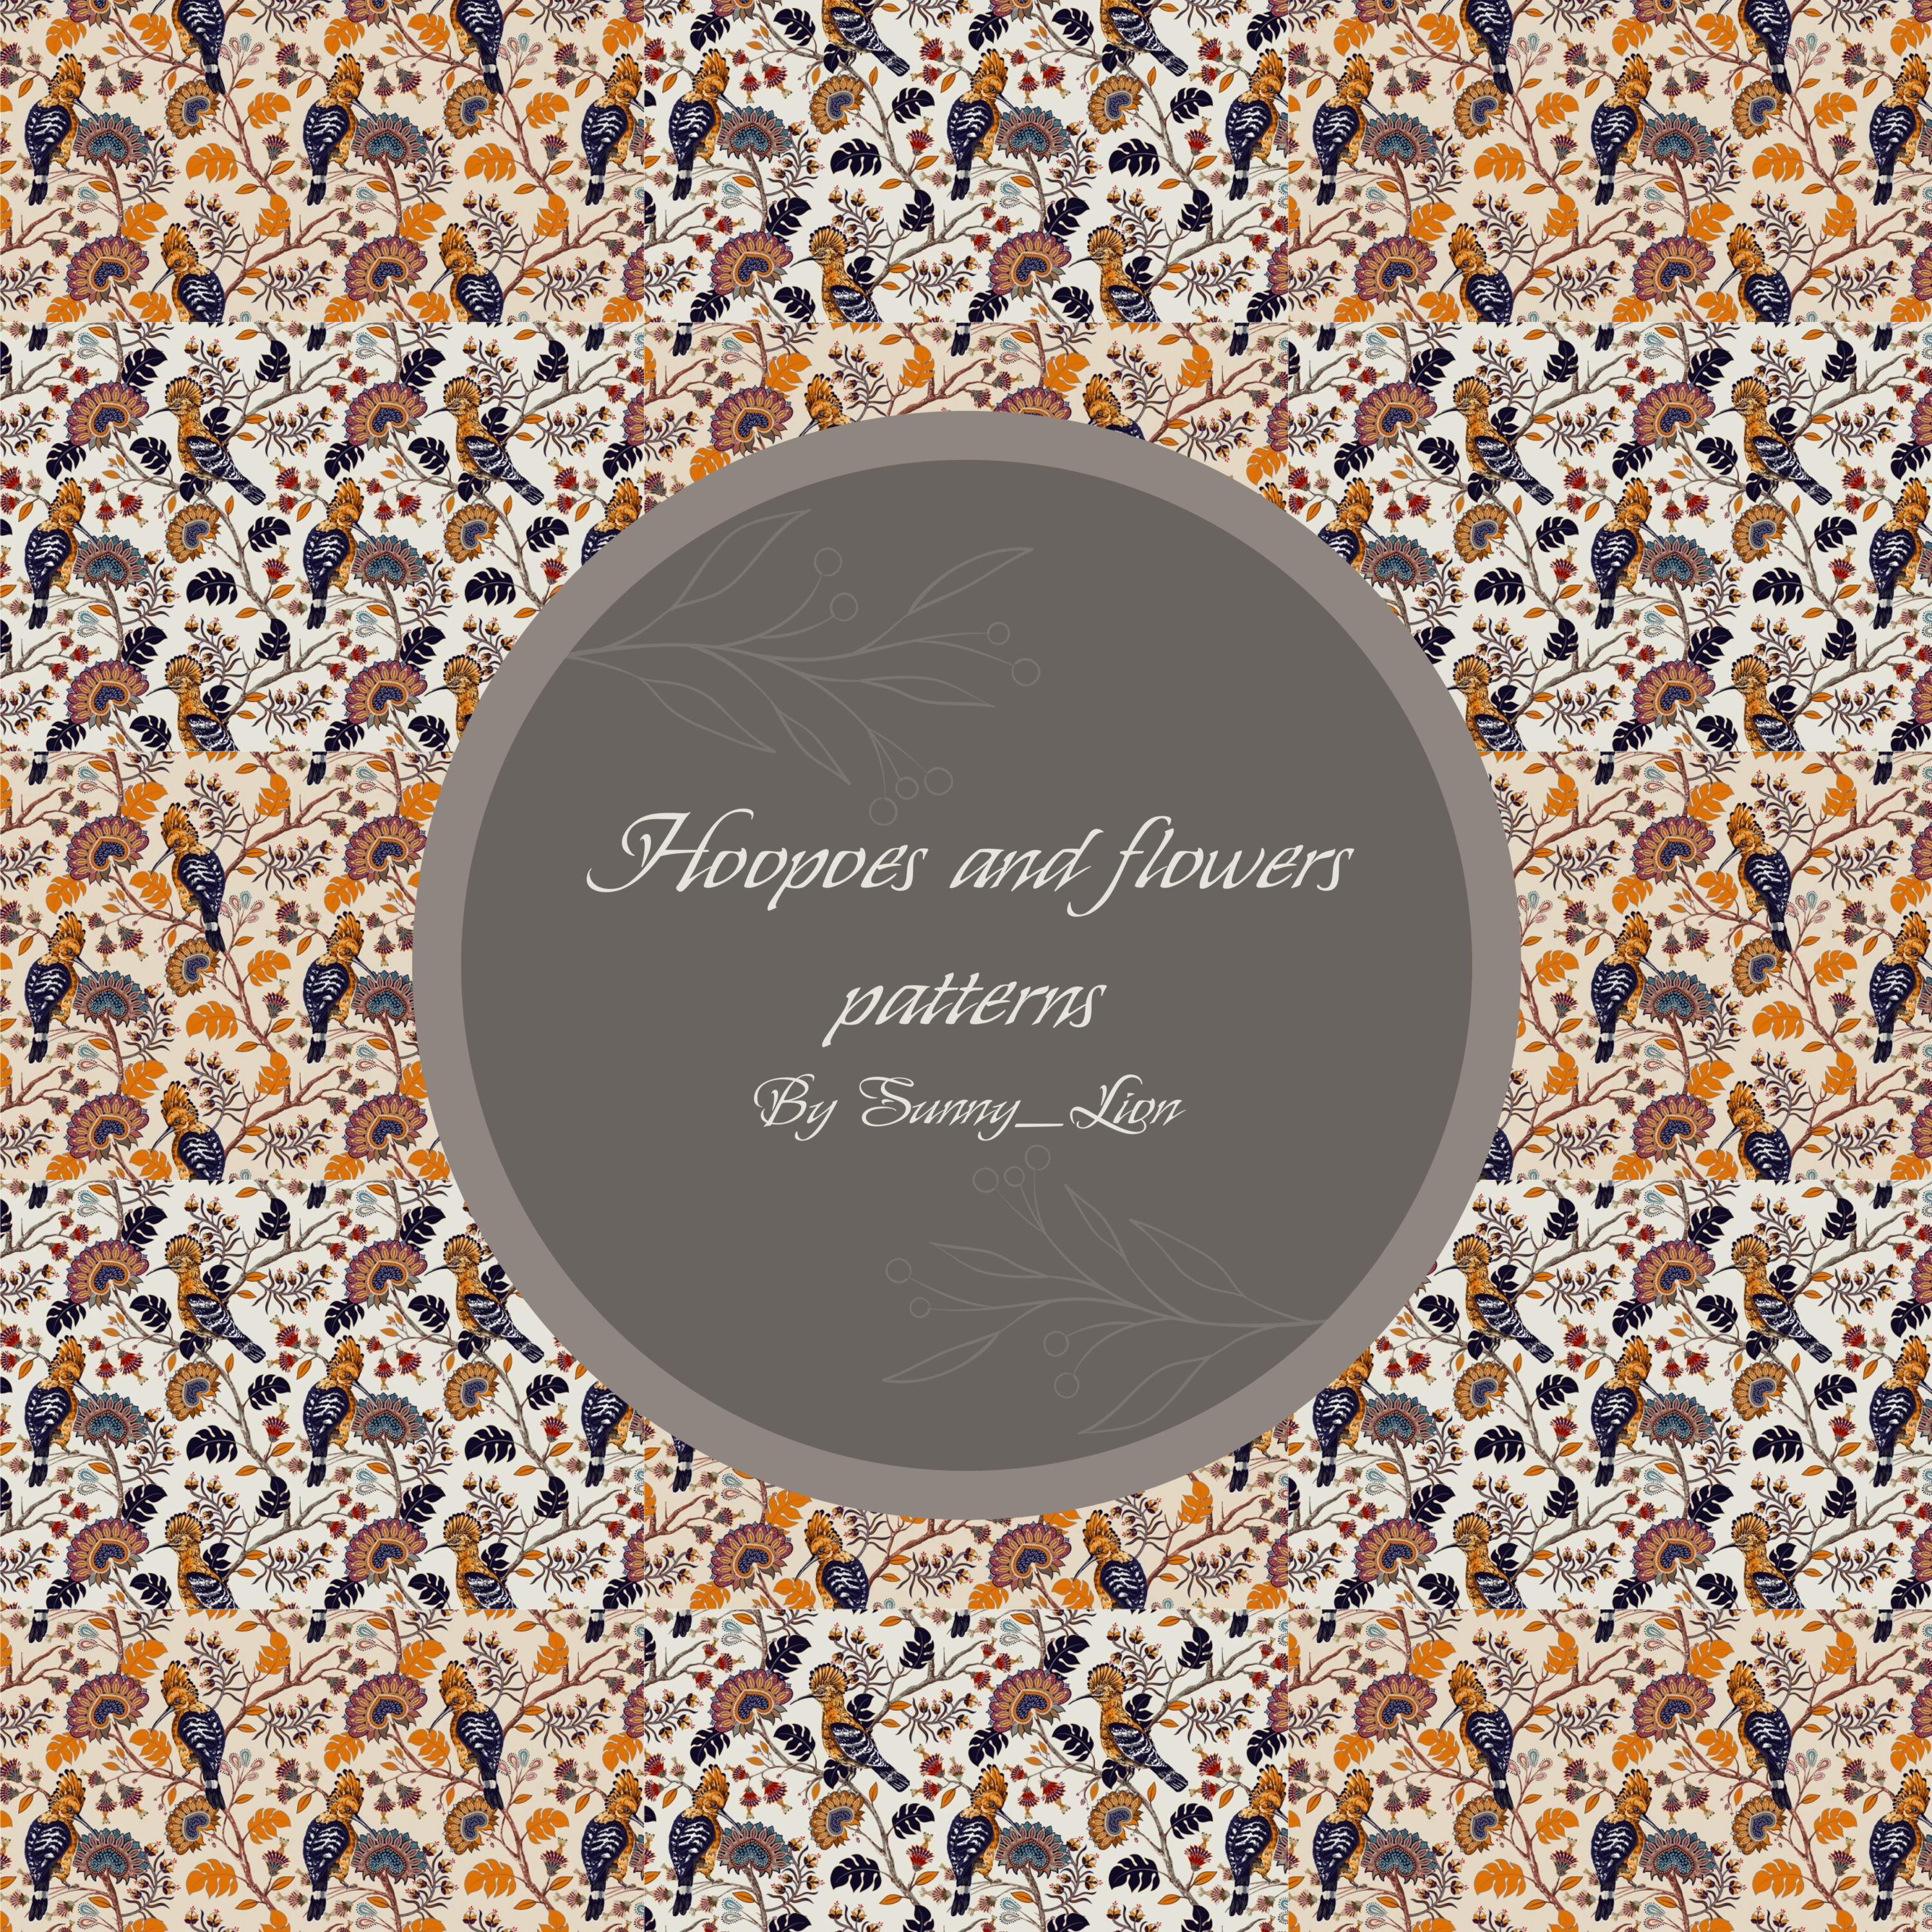 hoopoes and flowers patterns.